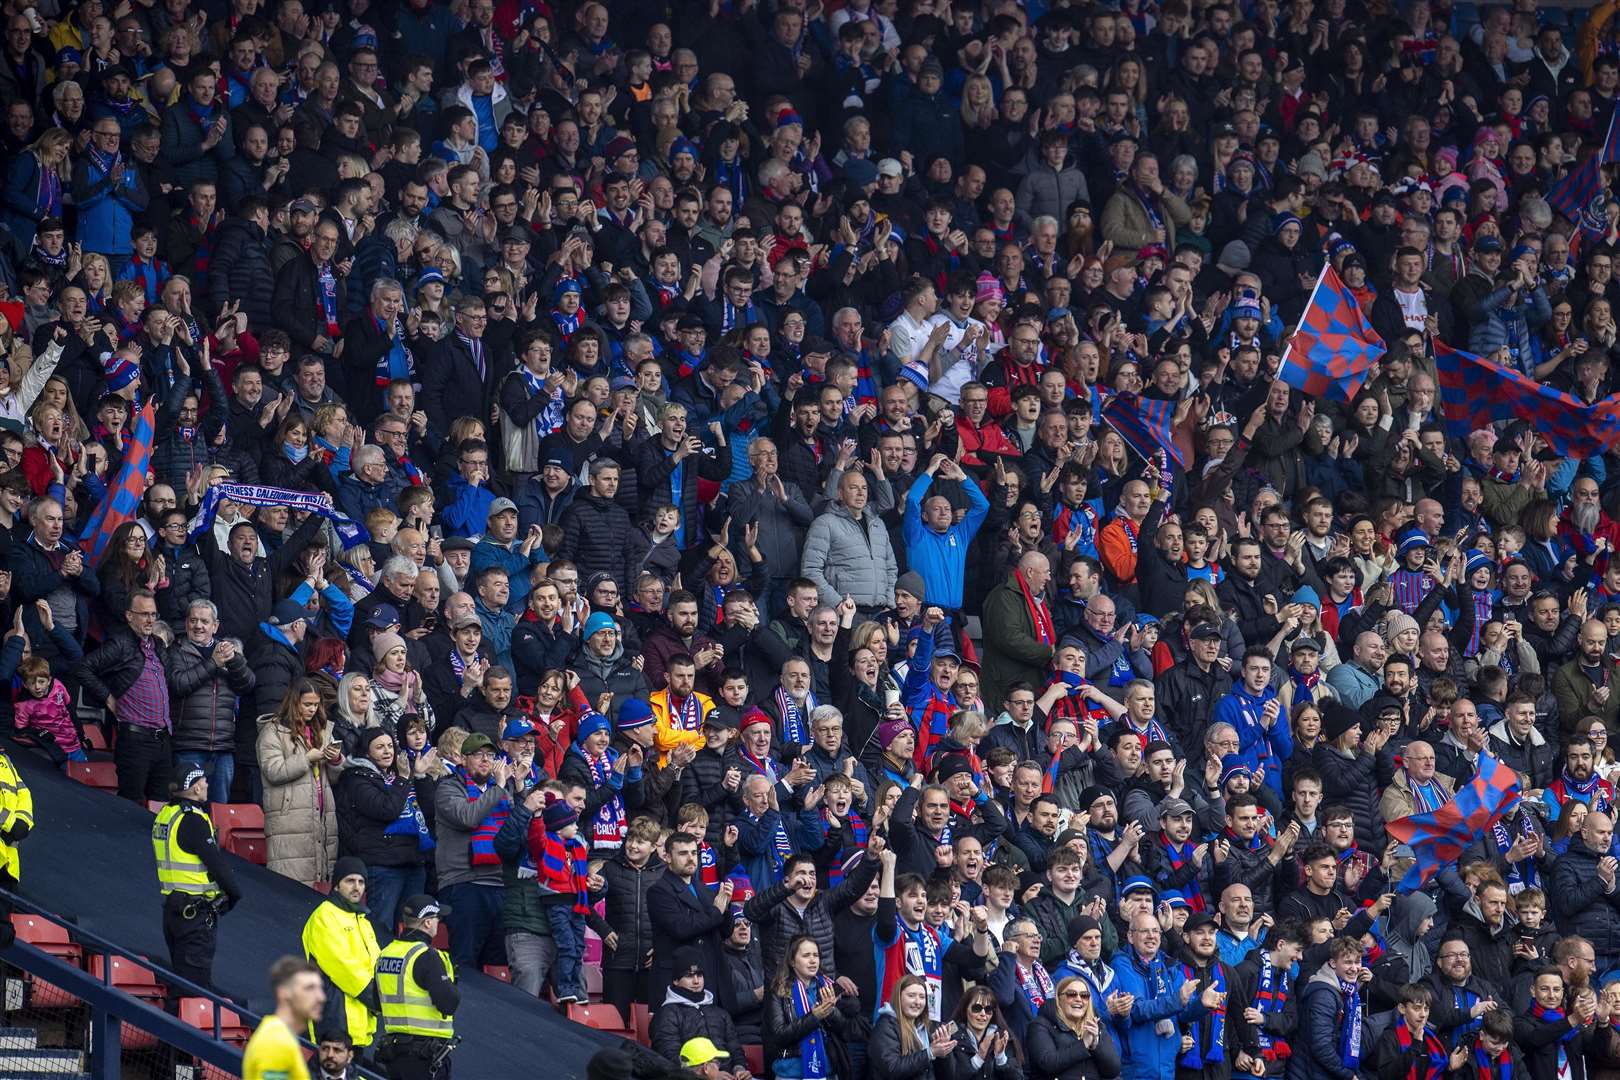 ICT fans celebrate Billy McKay’s opening goal in the semi-final victory over Falkirk.